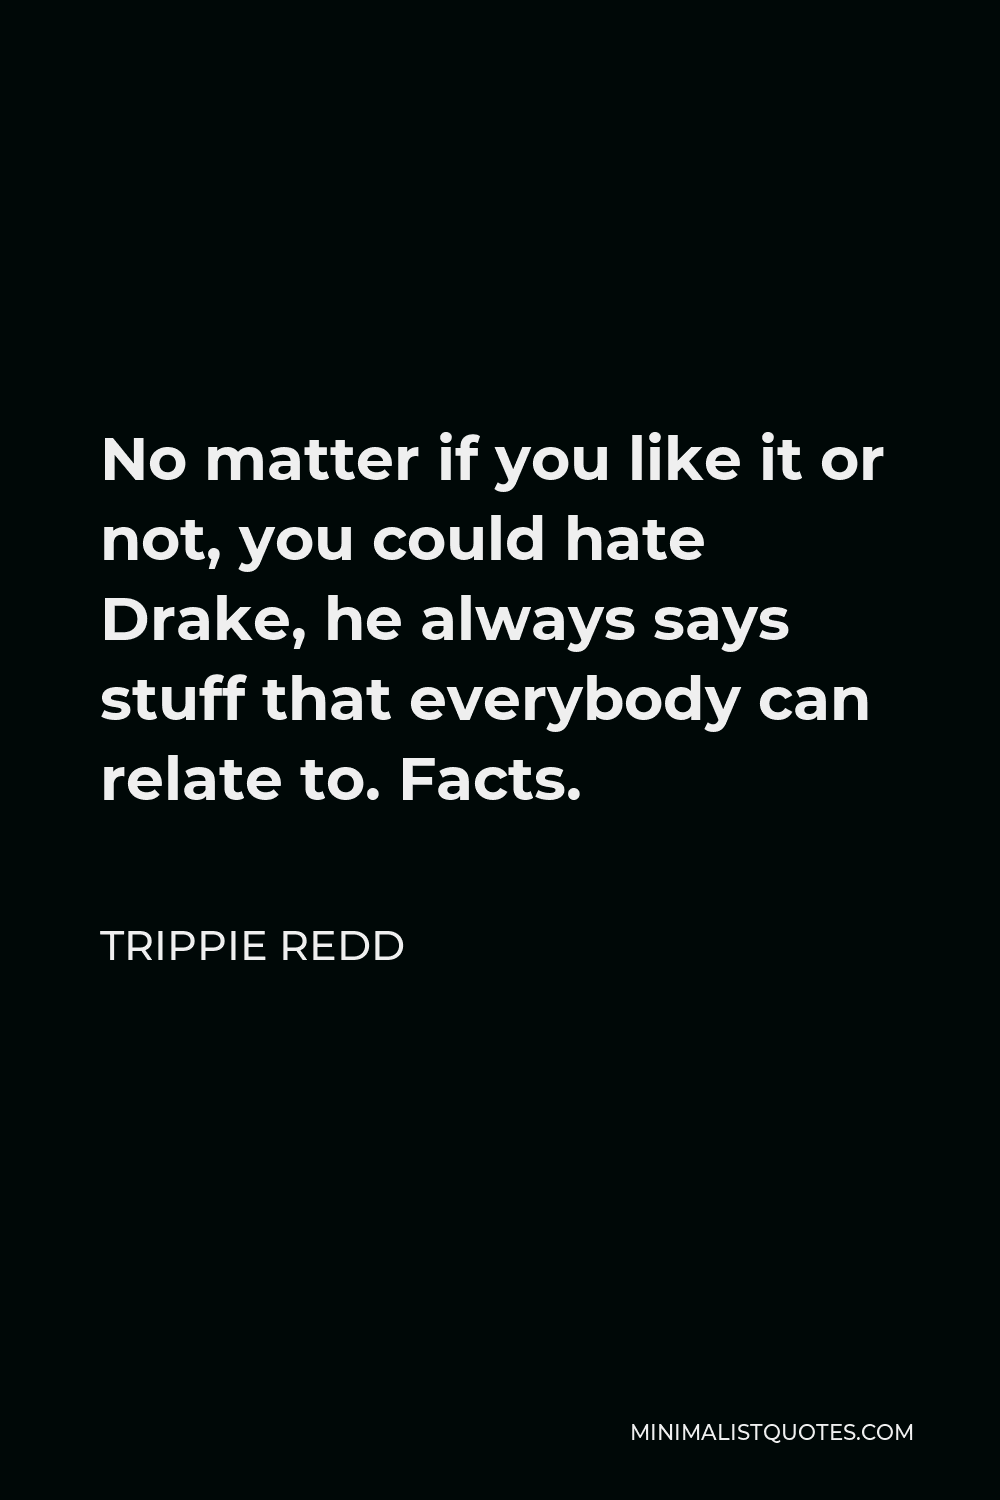 Trippie Redd Quote - No matter if you like it or not, you could hate Drake, he always says stuff that everybody can relate to. Facts.